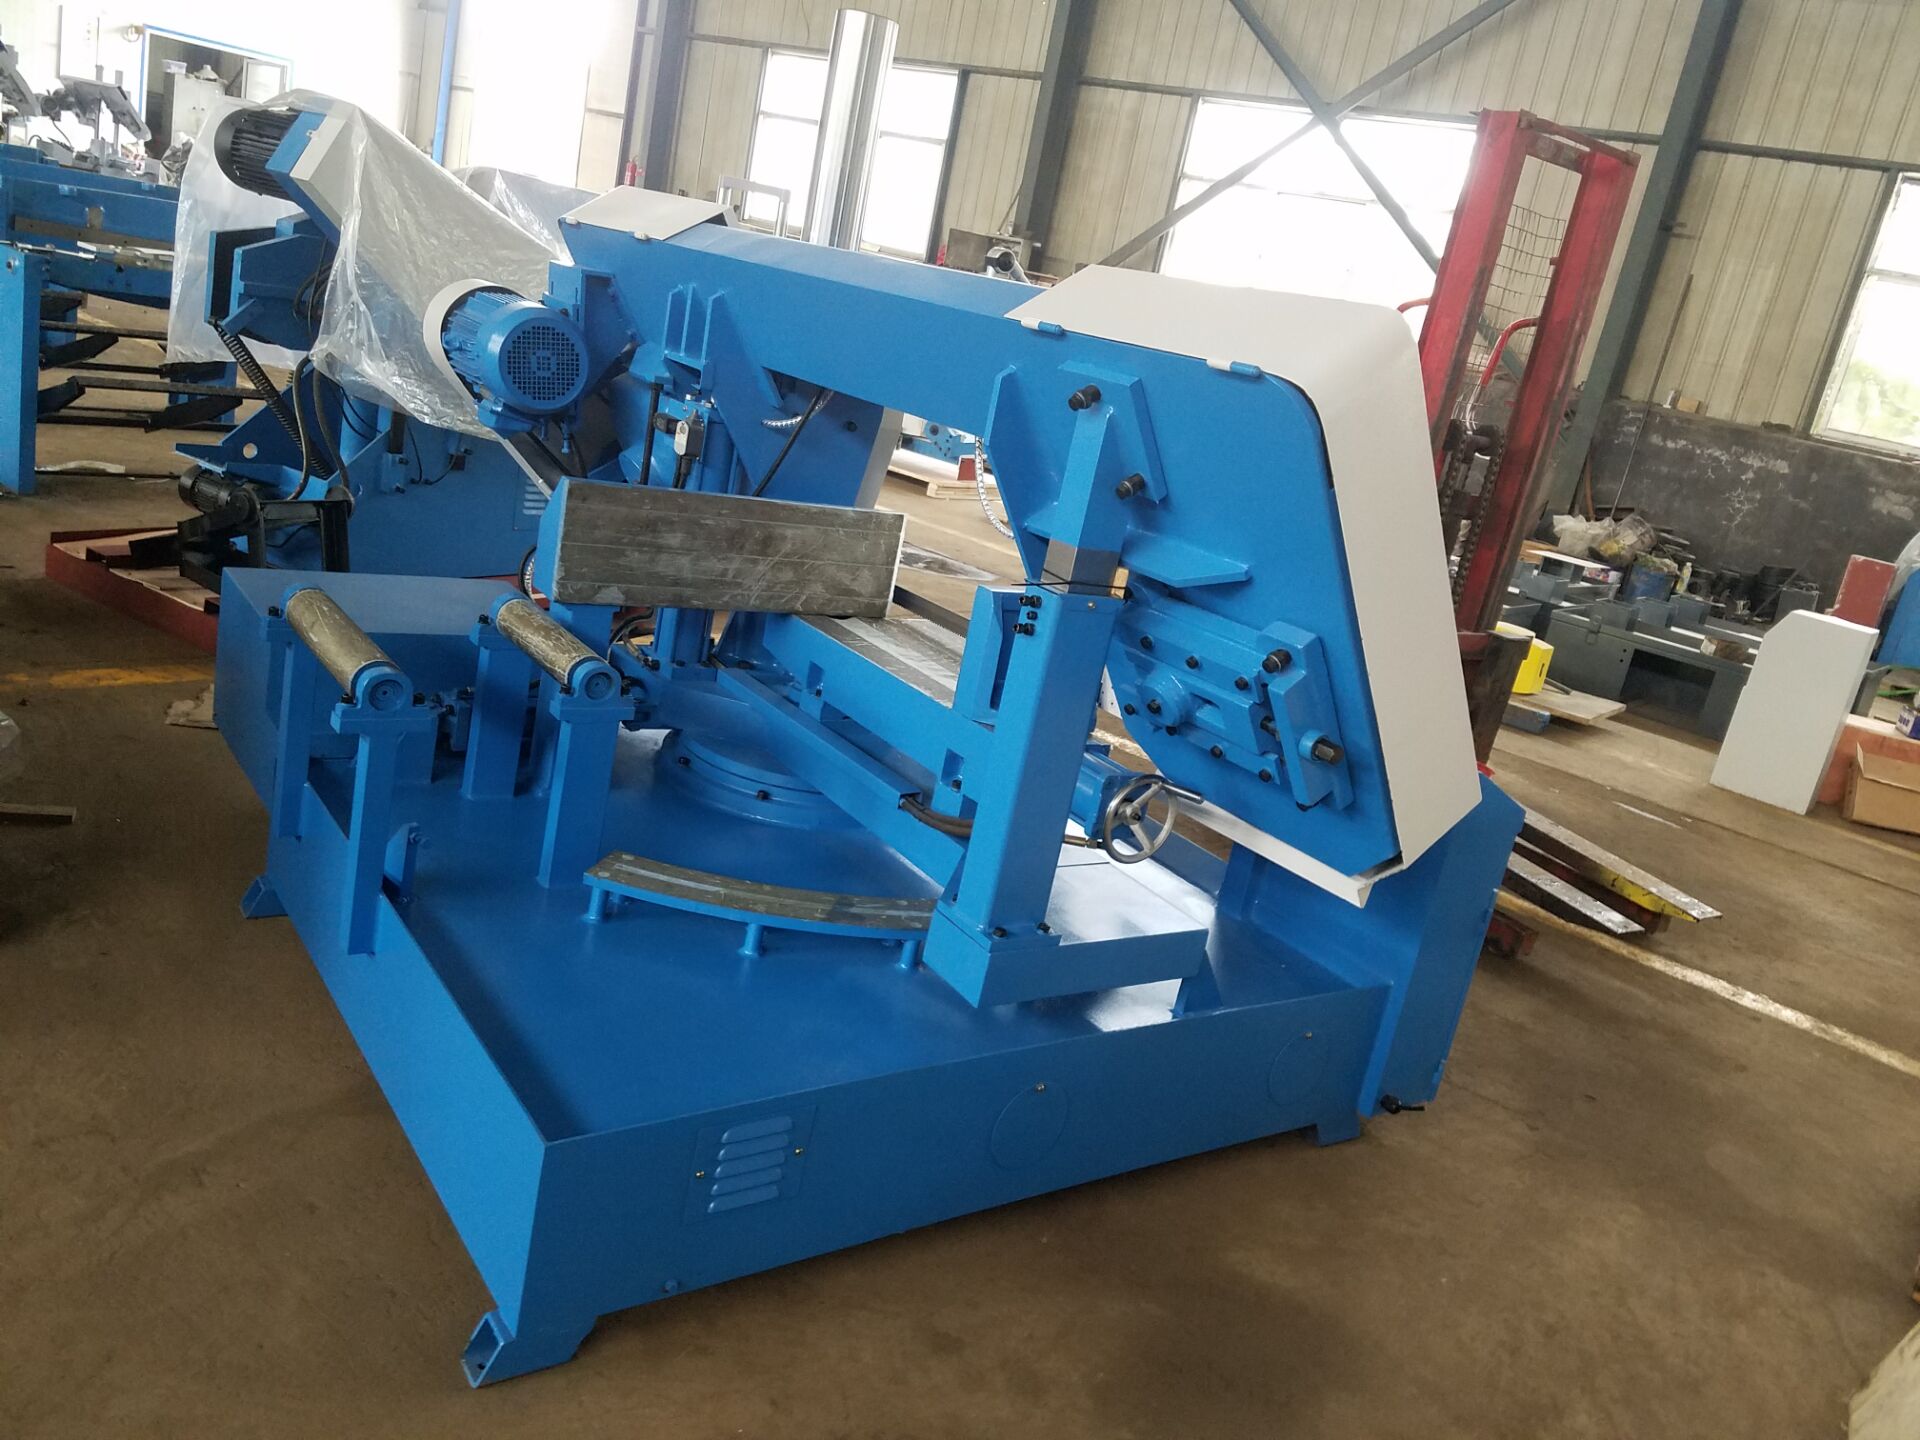 90 and 45 degree C Angle cutting band saw